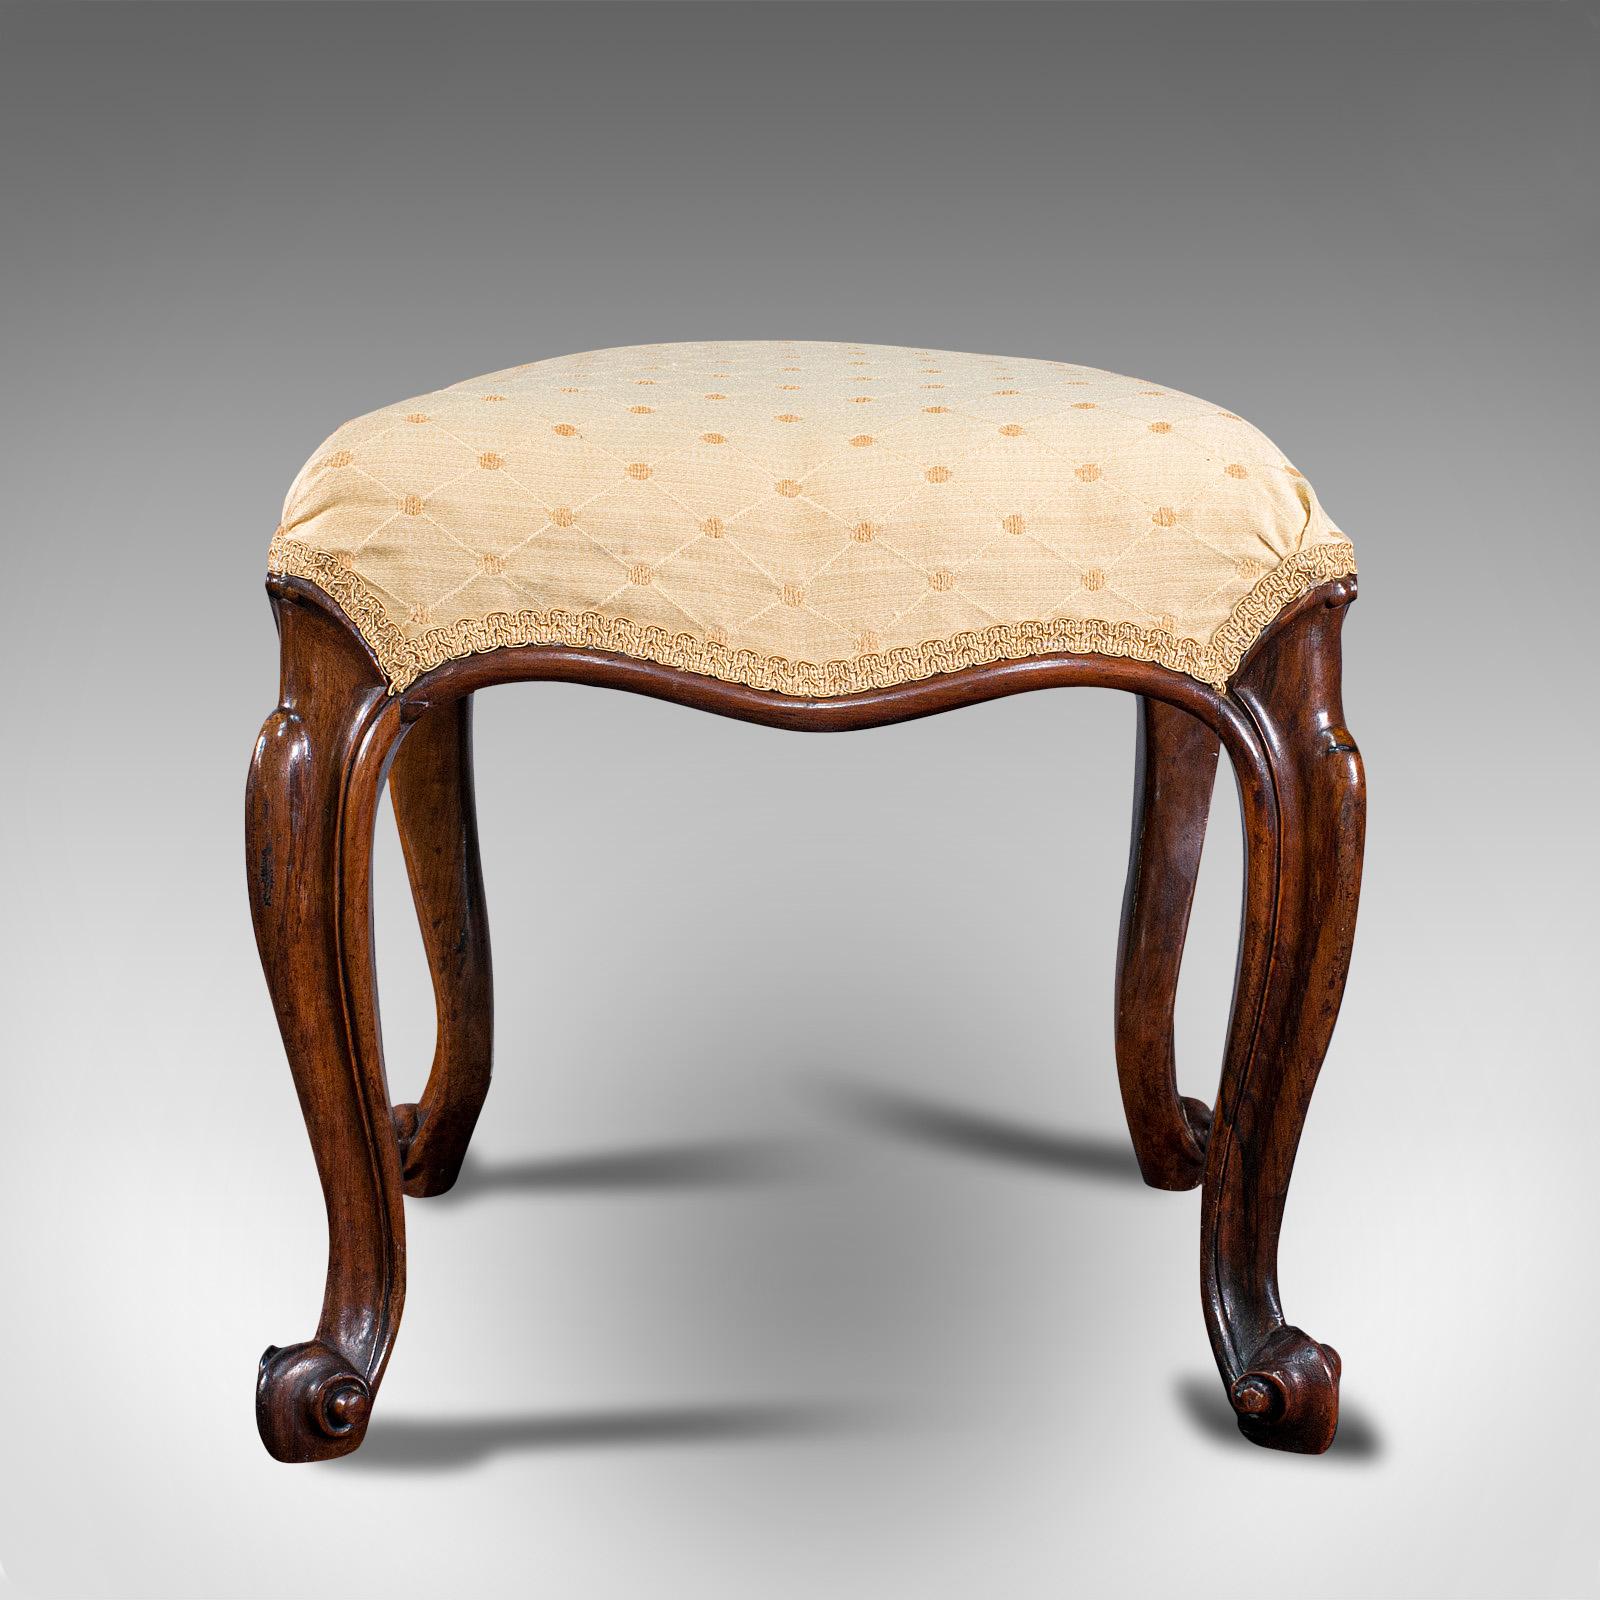 Antique Dressing Stool, English, Walnut, Upholstery, Boudoir Seat, Regency, 1820 In Good Condition For Sale In Hele, Devon, GB